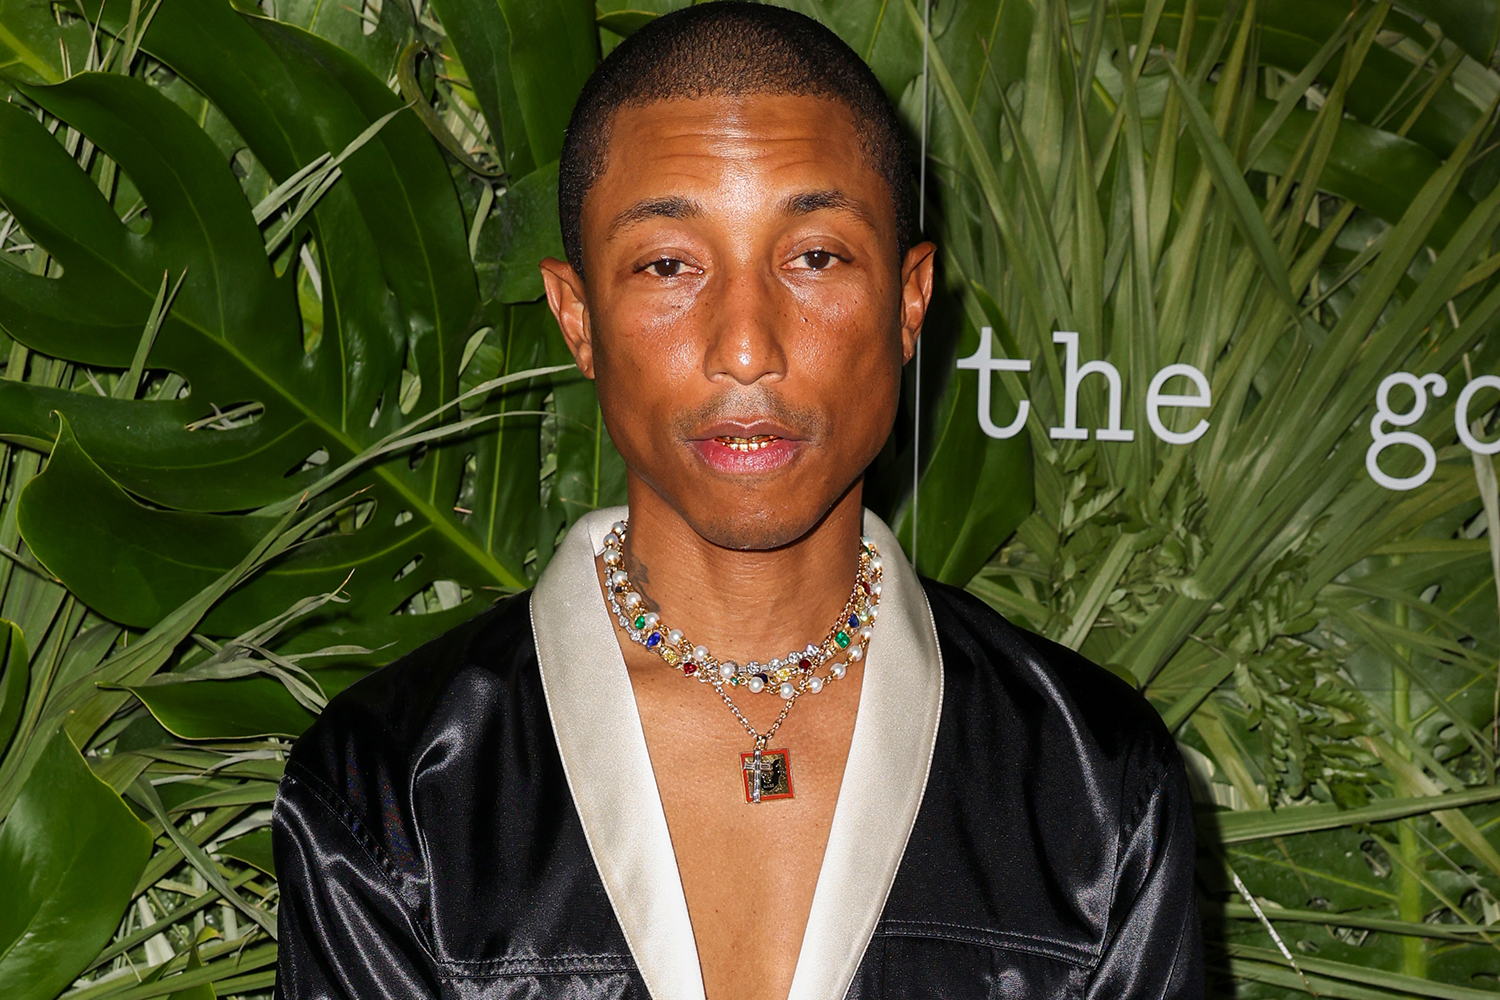 Pharrell Williams launches a new line of suncare products